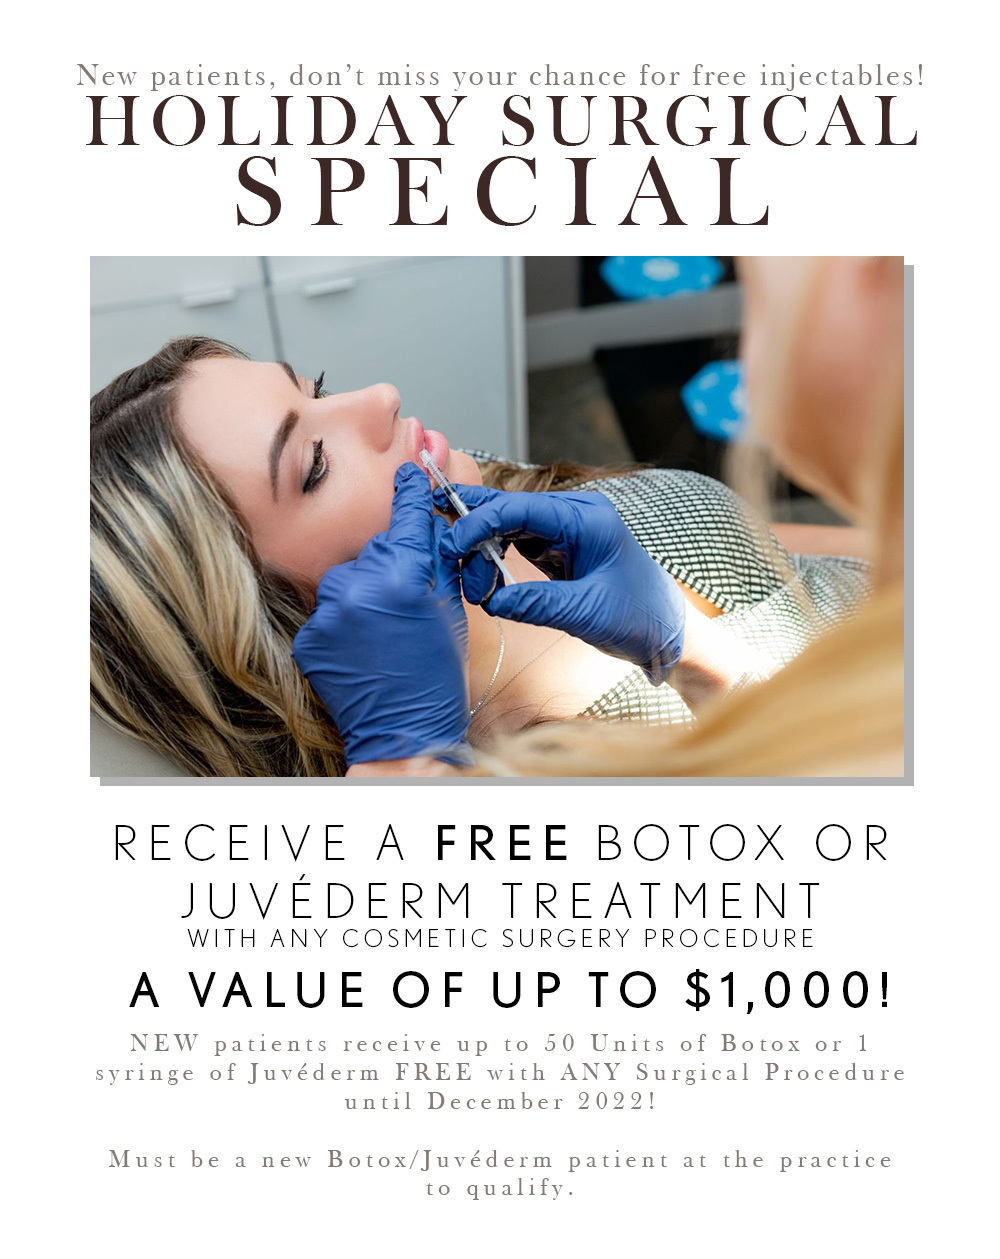 Specials for botox